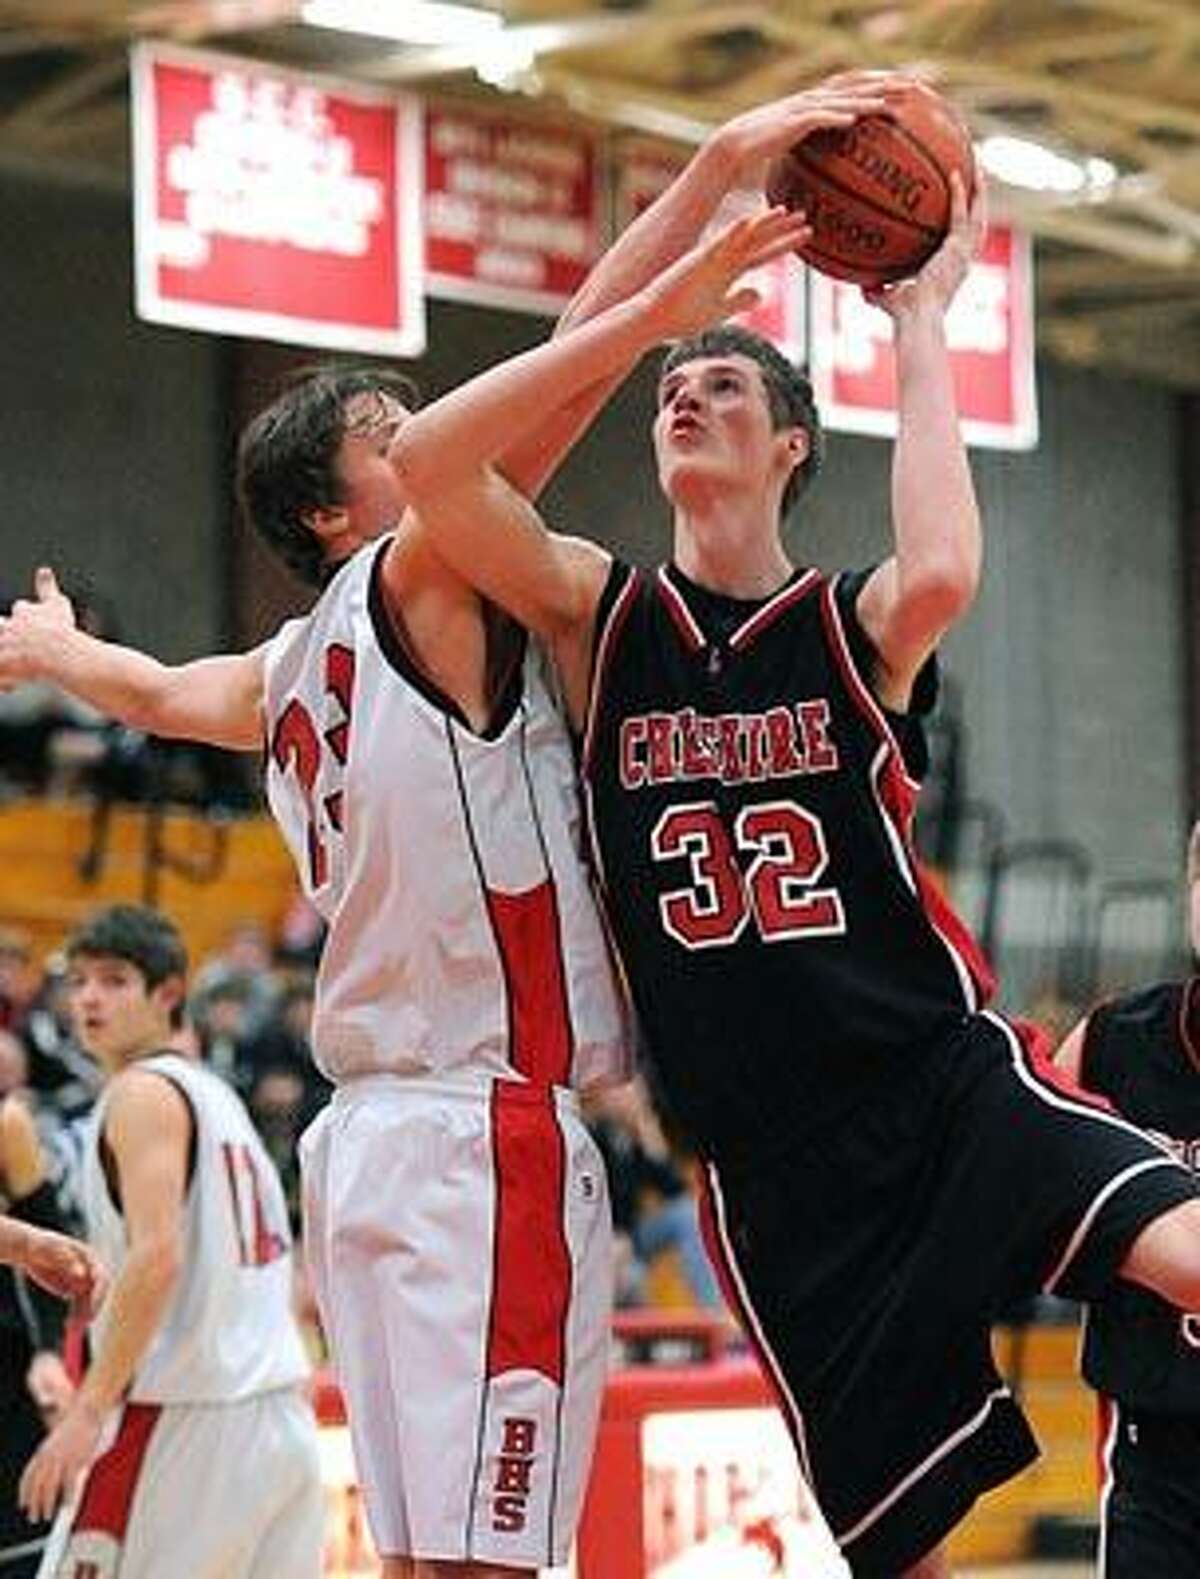 Cheshire's Nate Howard drives to the hoop as Branford's Kyle Nolan defends during the first quarter. Photo by Peter Casolino/New Haven Register 02/24/11 Cas11024